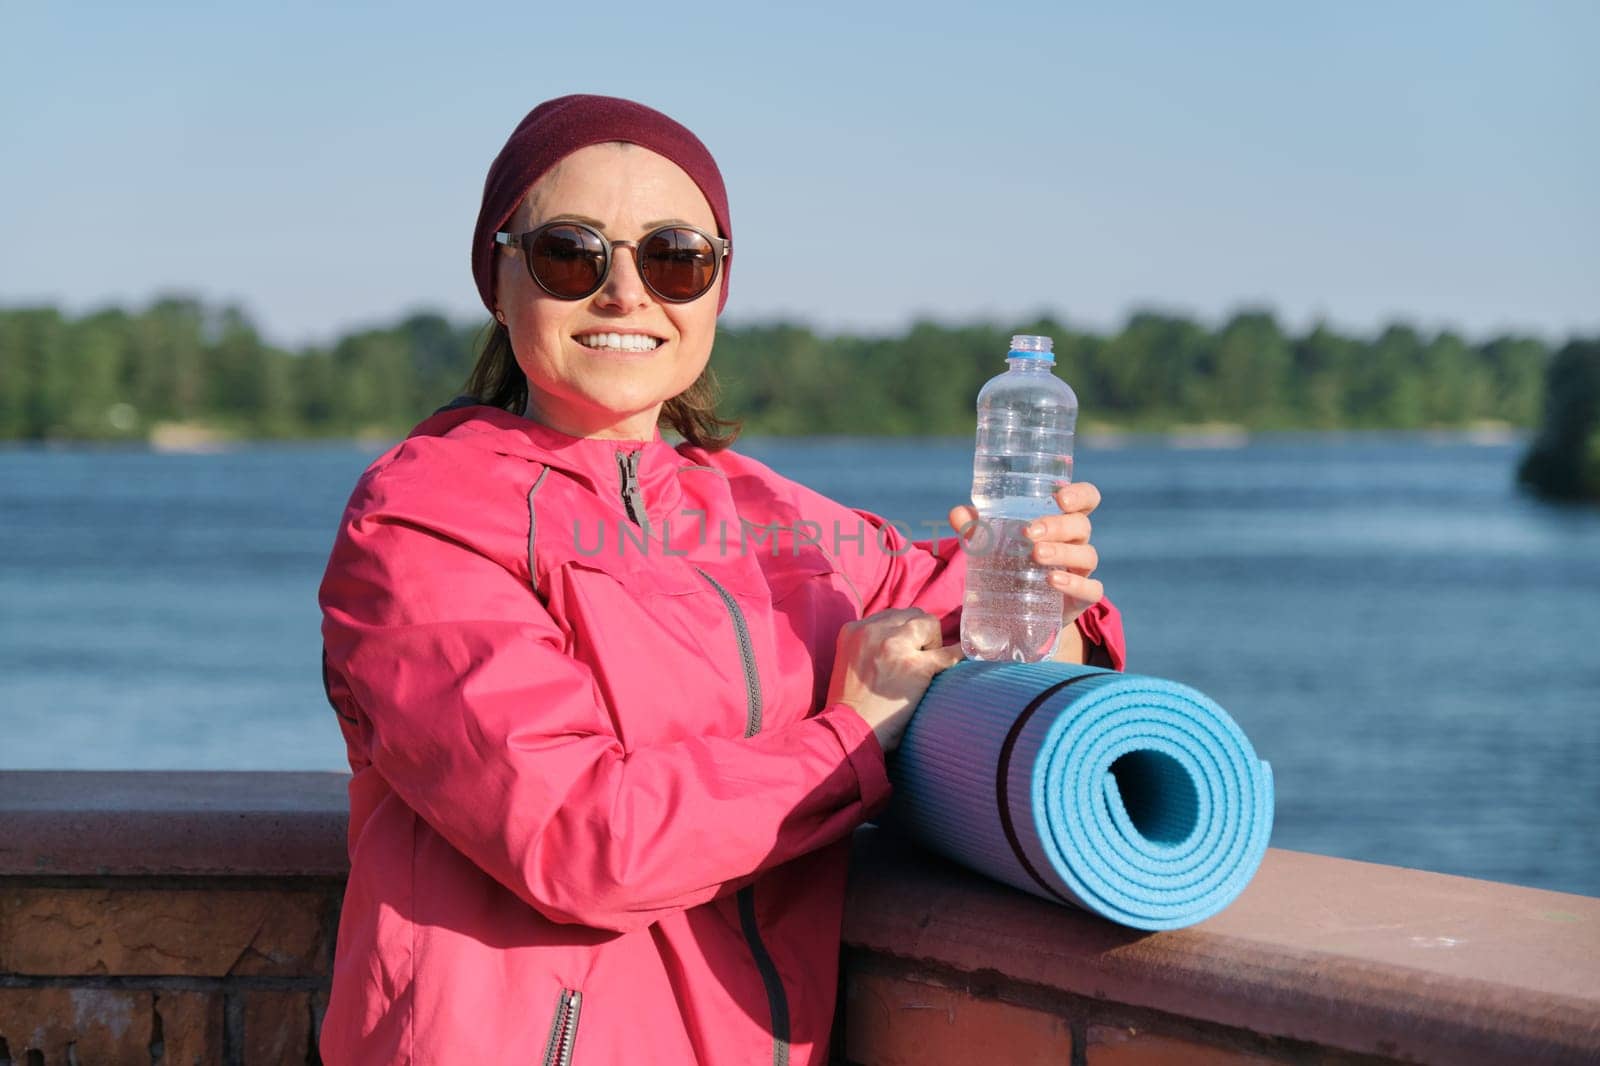 Healthy lifestyle of mature woman, outdoor portrait of an age female in sportswear with yoga mat, drinking water from bottle, background blue sky, river, evening sun